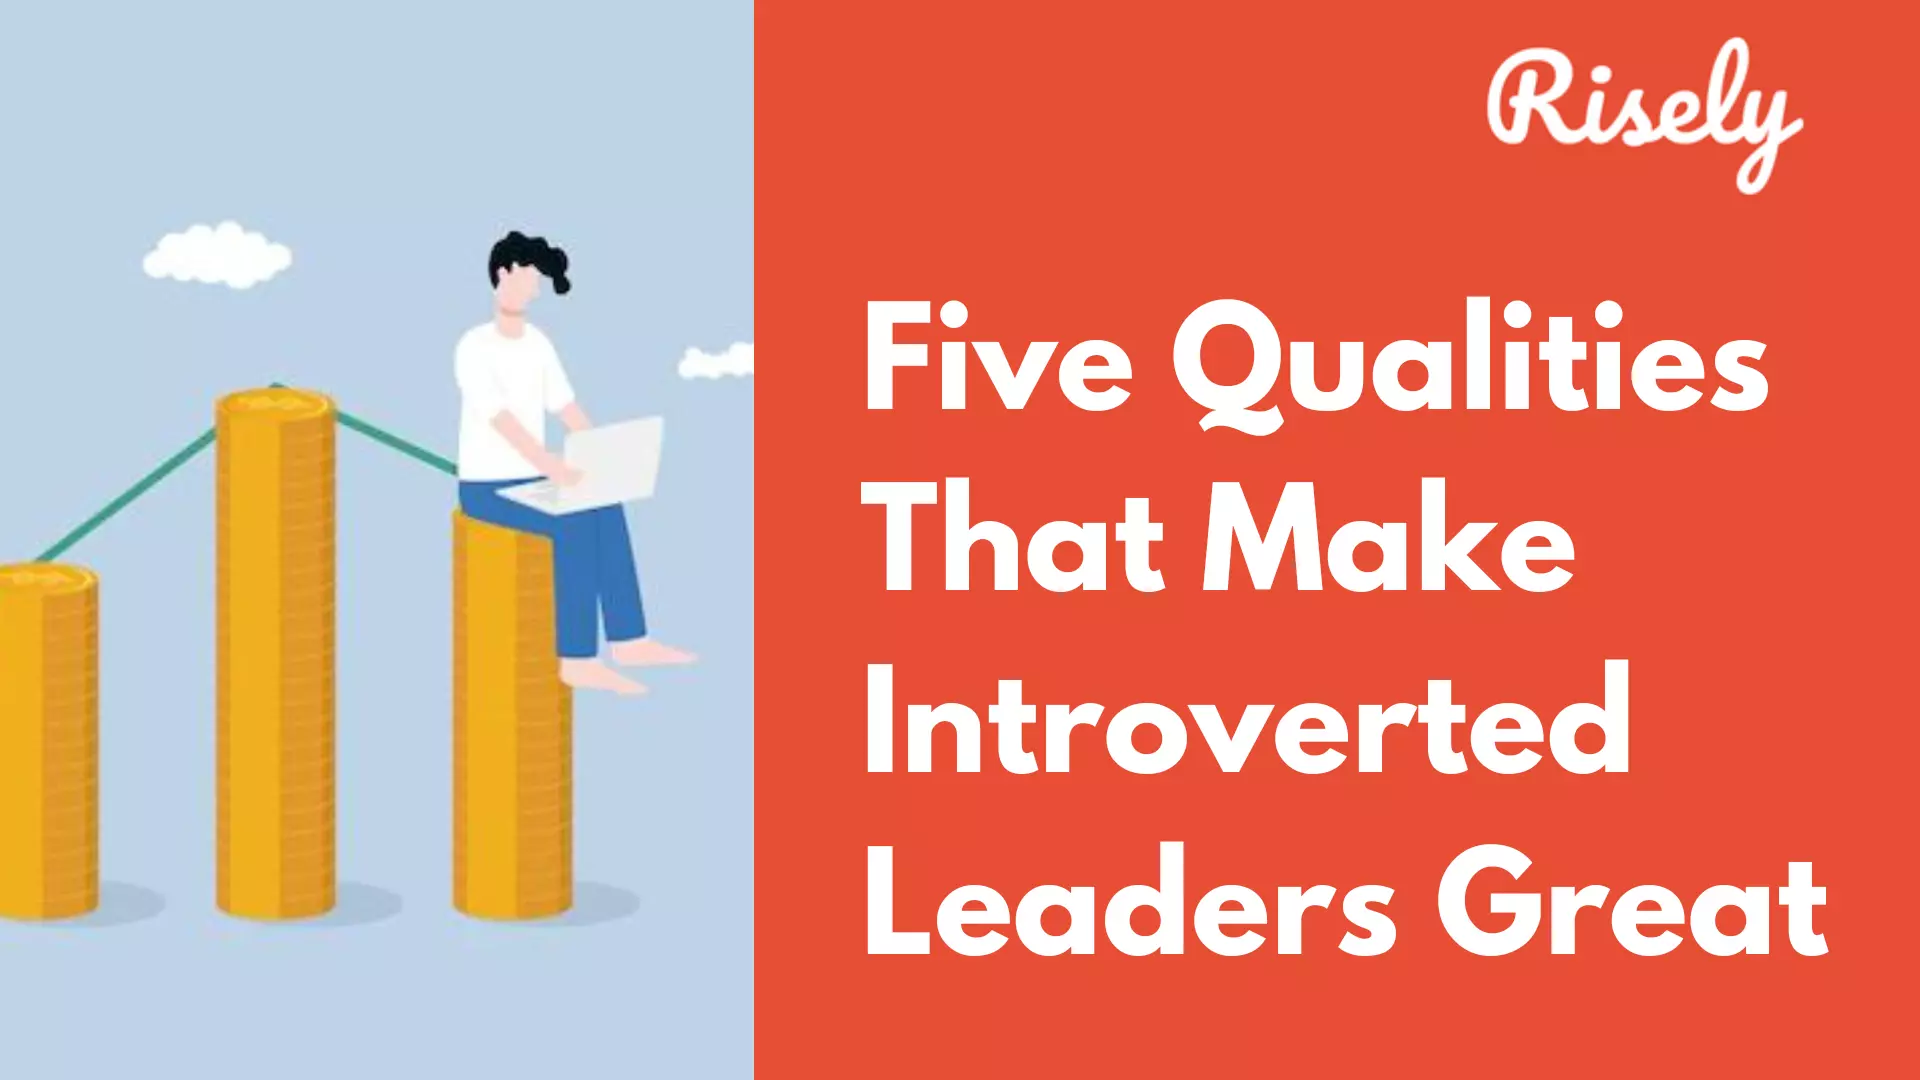 Introverted leaders